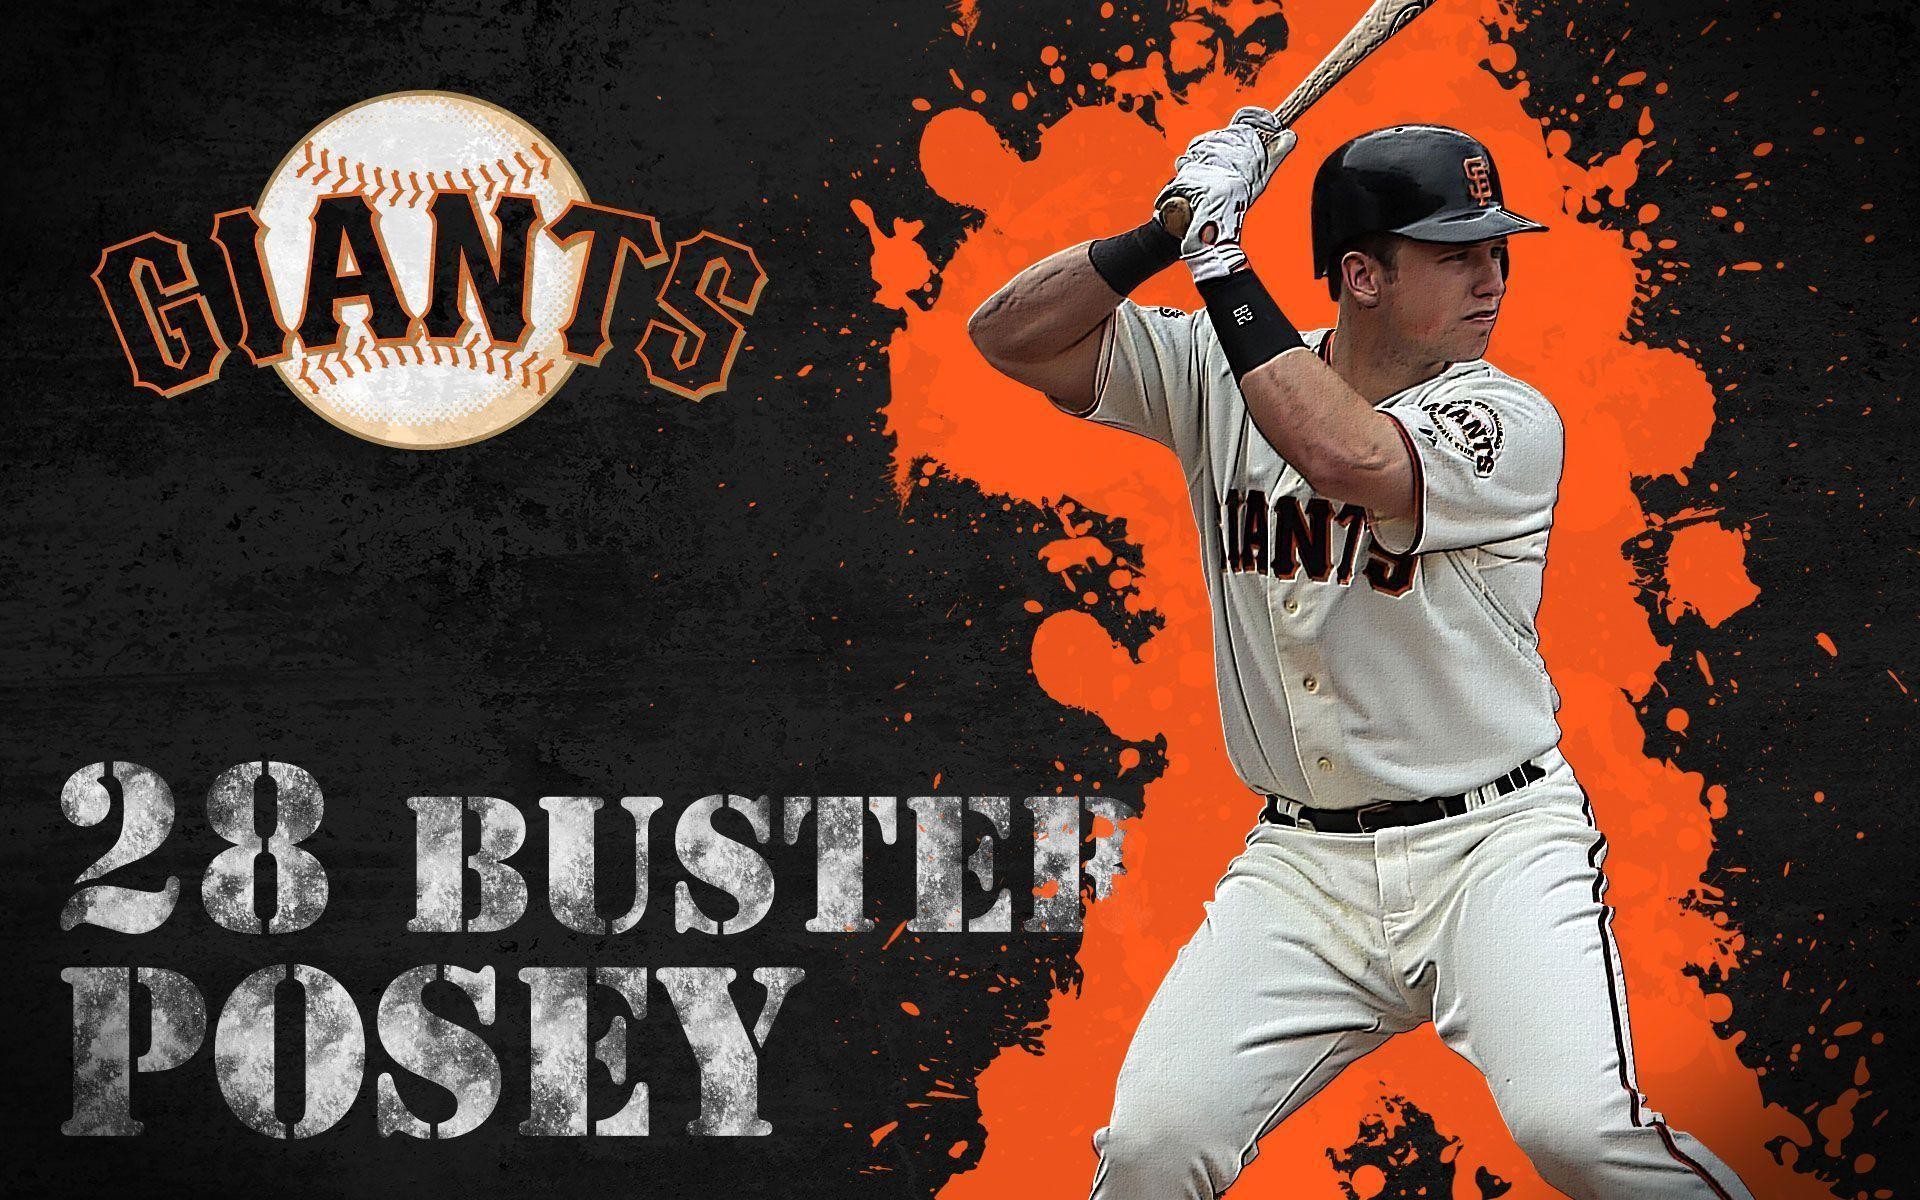 1920x1200 Free Wallpapers - Buster Posey wallpaper